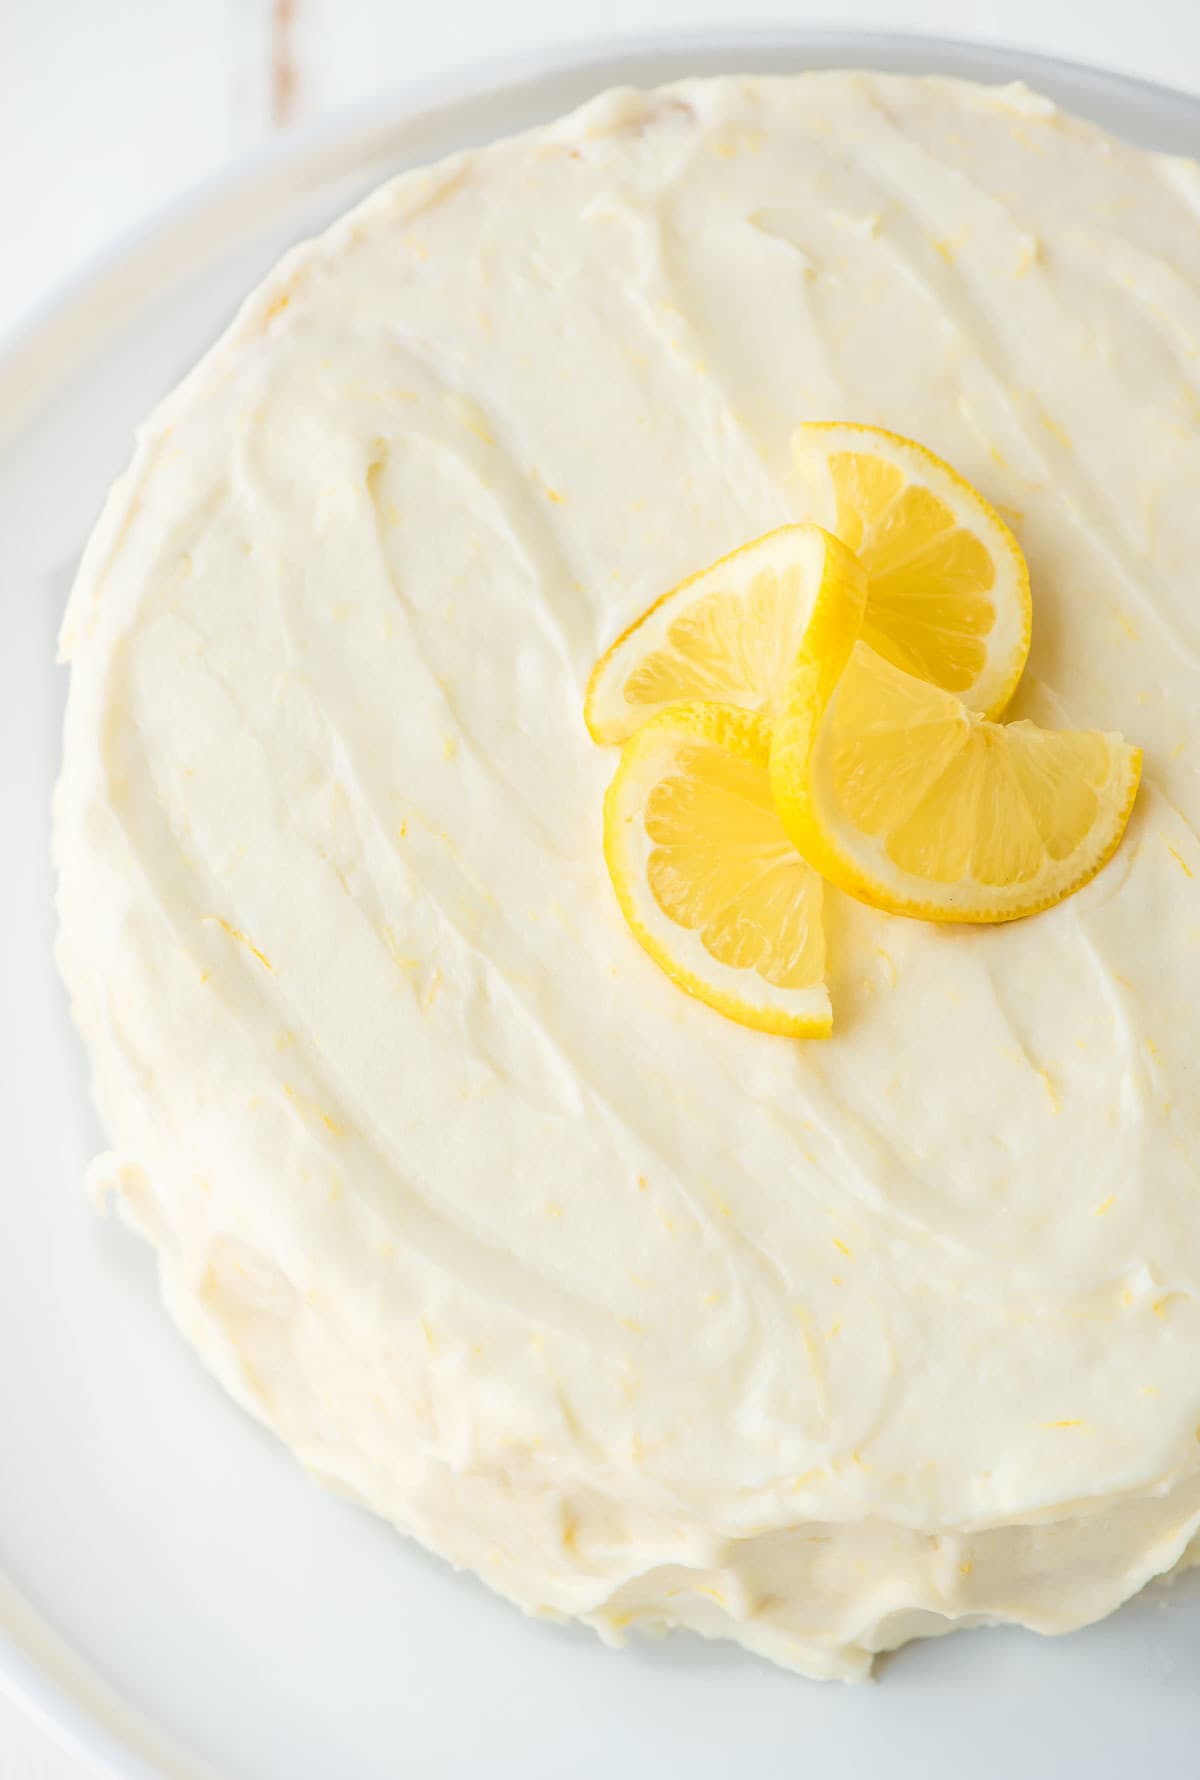 lemon layer cake recipe frosted with lemon cream cheese frosting, topped with fresh lemon slices